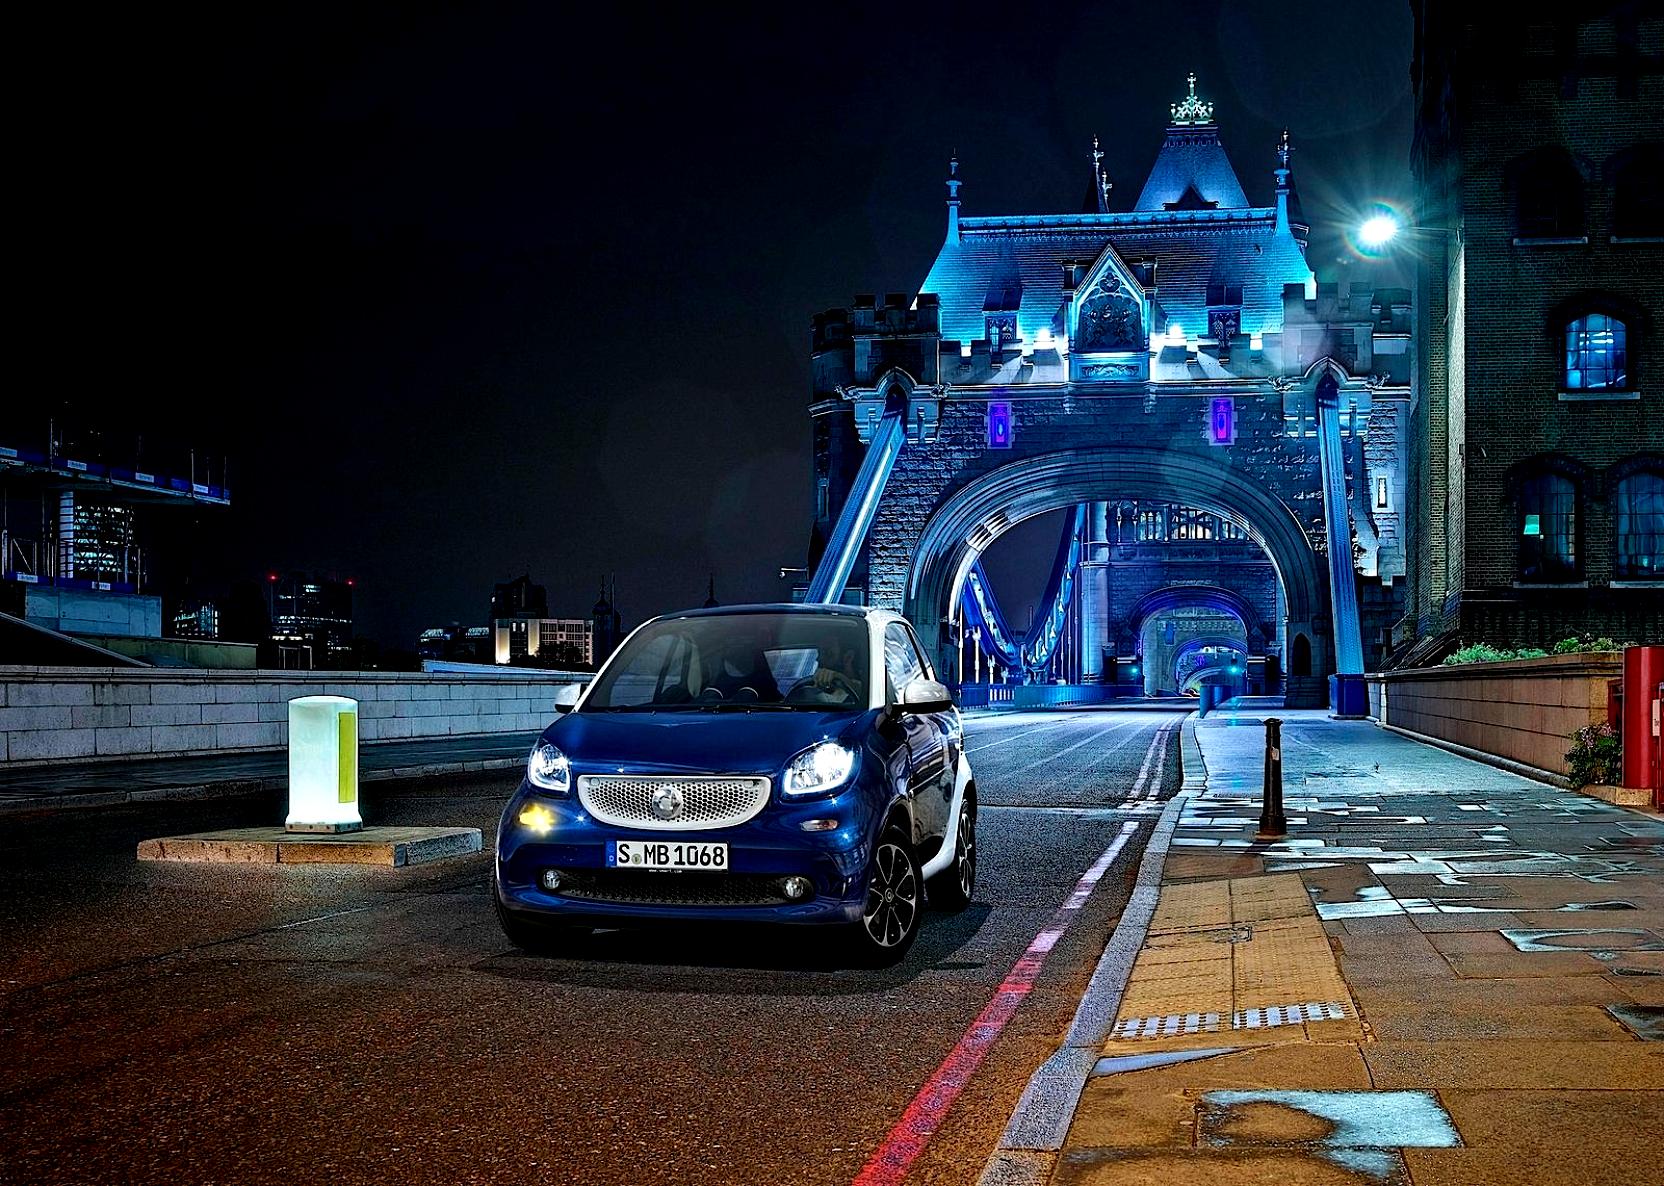 Smart Fortwo 2014 #38